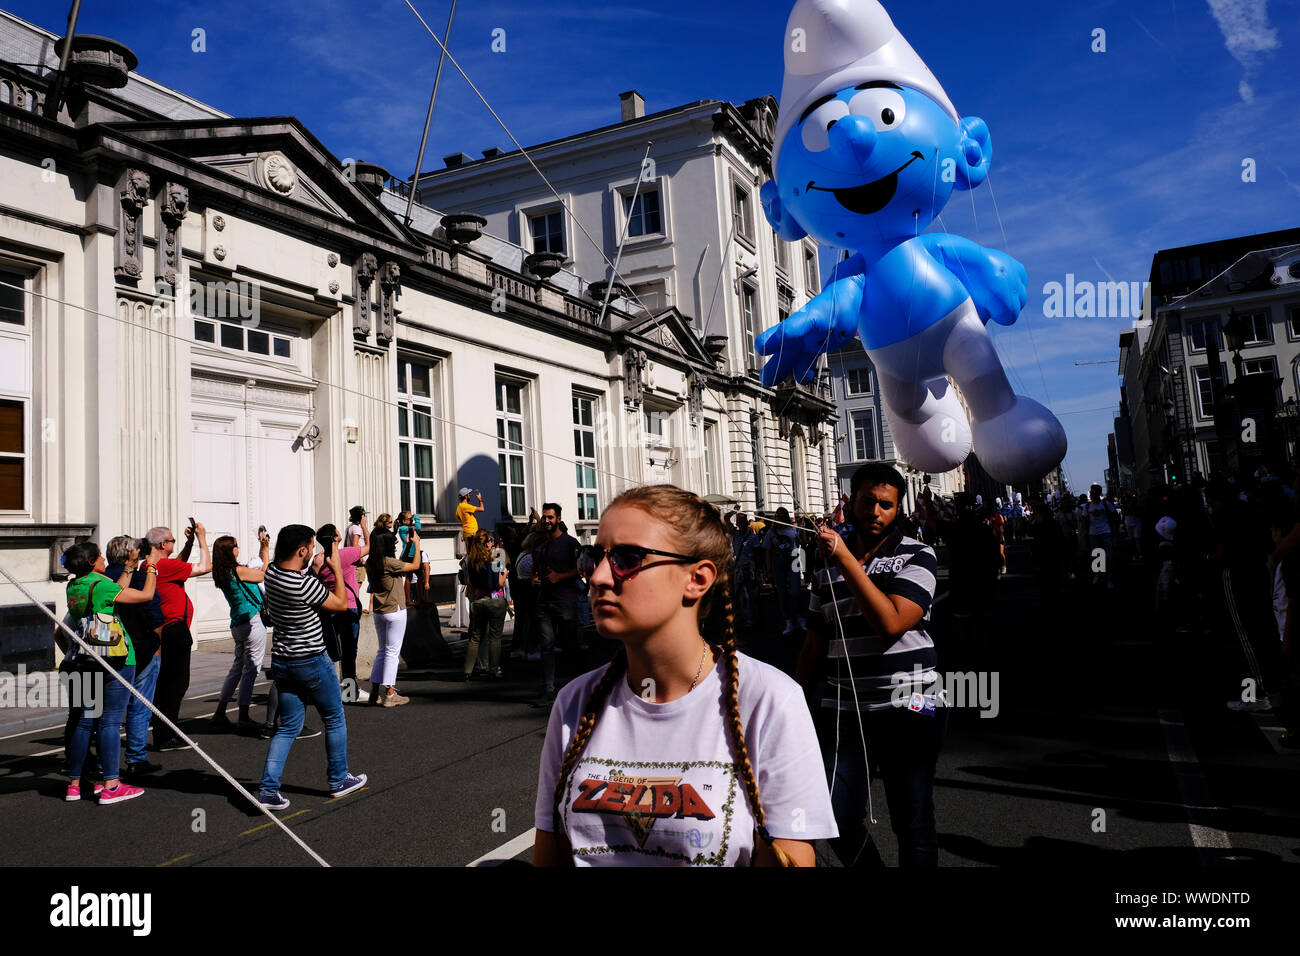 Brussels, Belgium. 15th Sep, 2019. A giant balloon of a Smurf comic strip character floats during the Balloon Day Parade along the downtown boulevards in Brussels, Belgium September 15, 2019. Credit: ALEXANDROS MICHAILIDIS/Alamy Live News Stock Photo